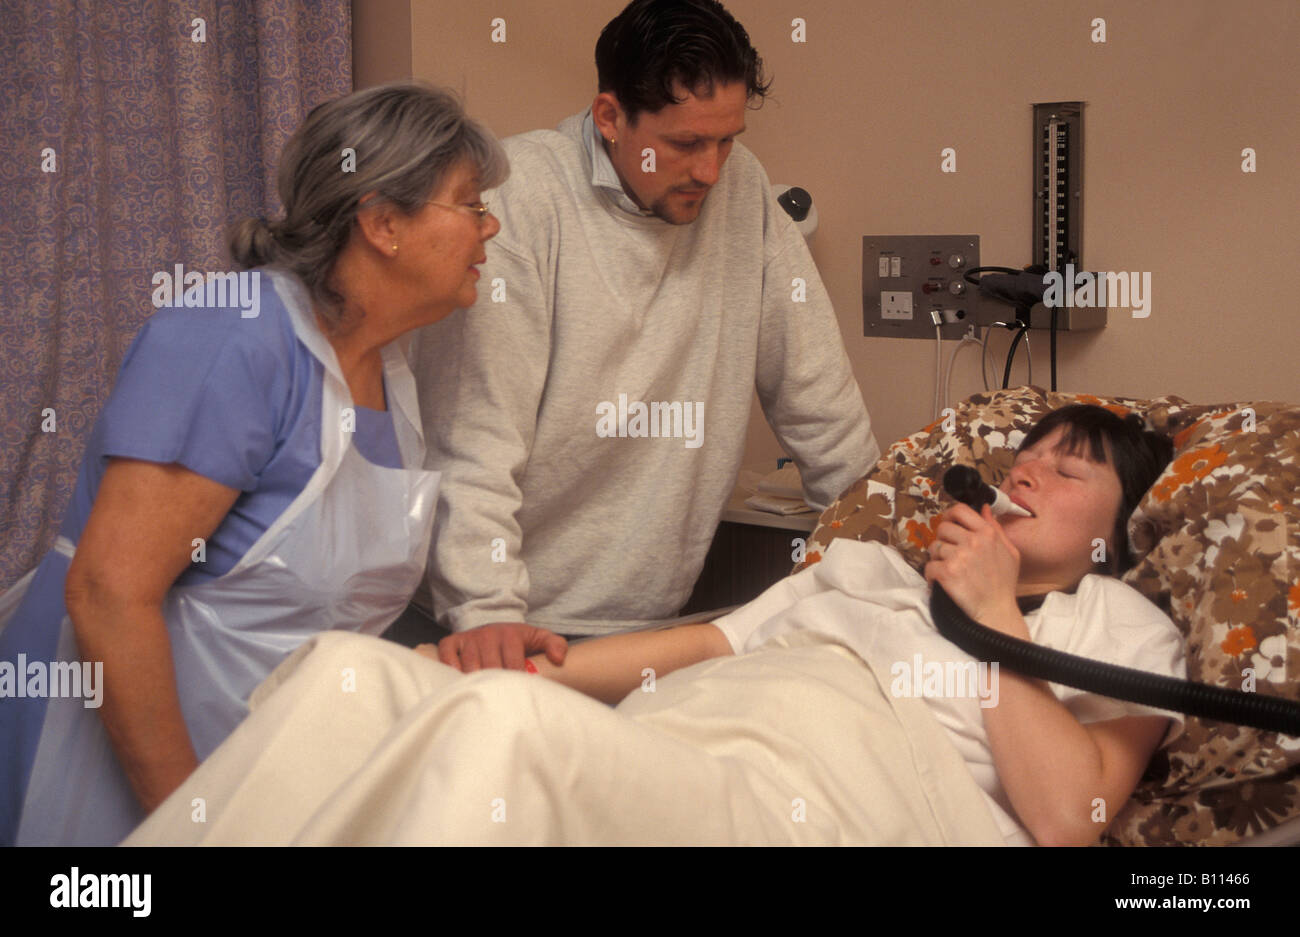 midwife partner supporting young woman in labour using gas air for pain relief Stock Photo